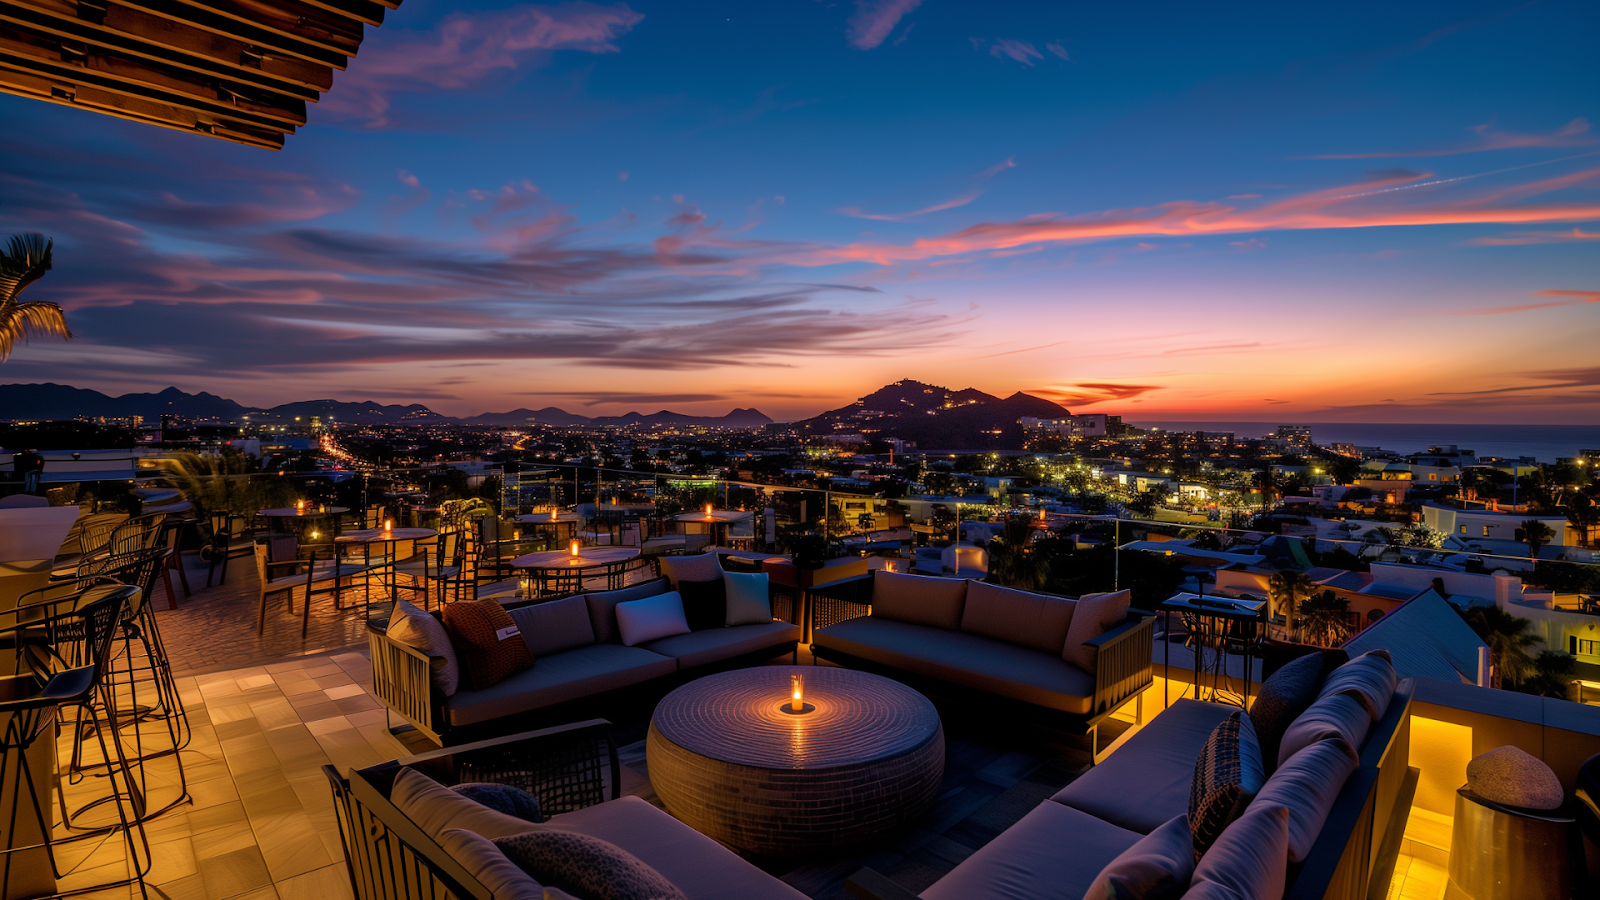 A rooftop bar in Cabo San Lucas, with stunning city views and a beautiful sunset in the background.